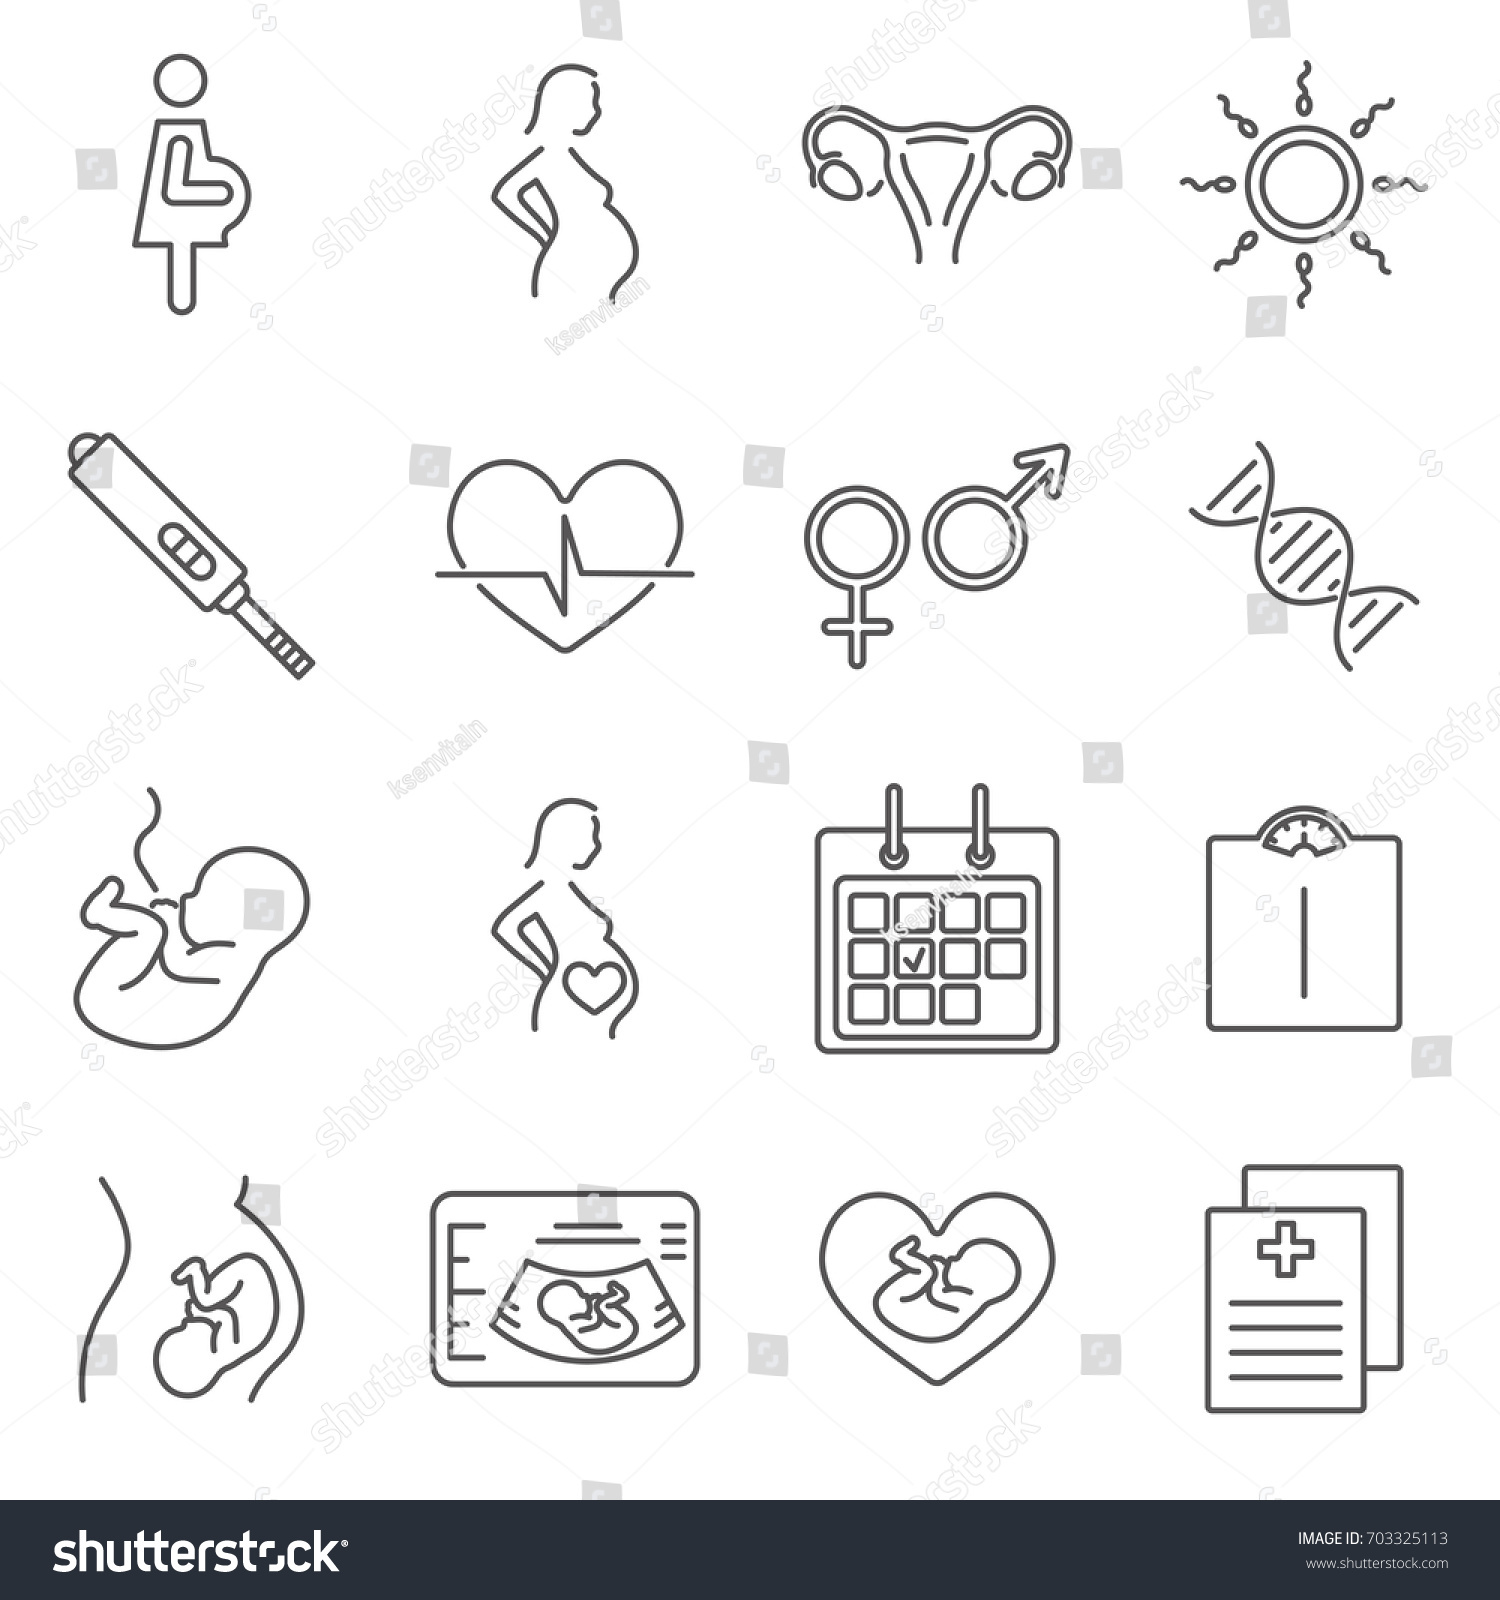 Simple Set of pregnancy Related Vector Line Icons. Contains such Icons as motherhood, child, embryo, pregnancy test, childbirth and more.  #703325113